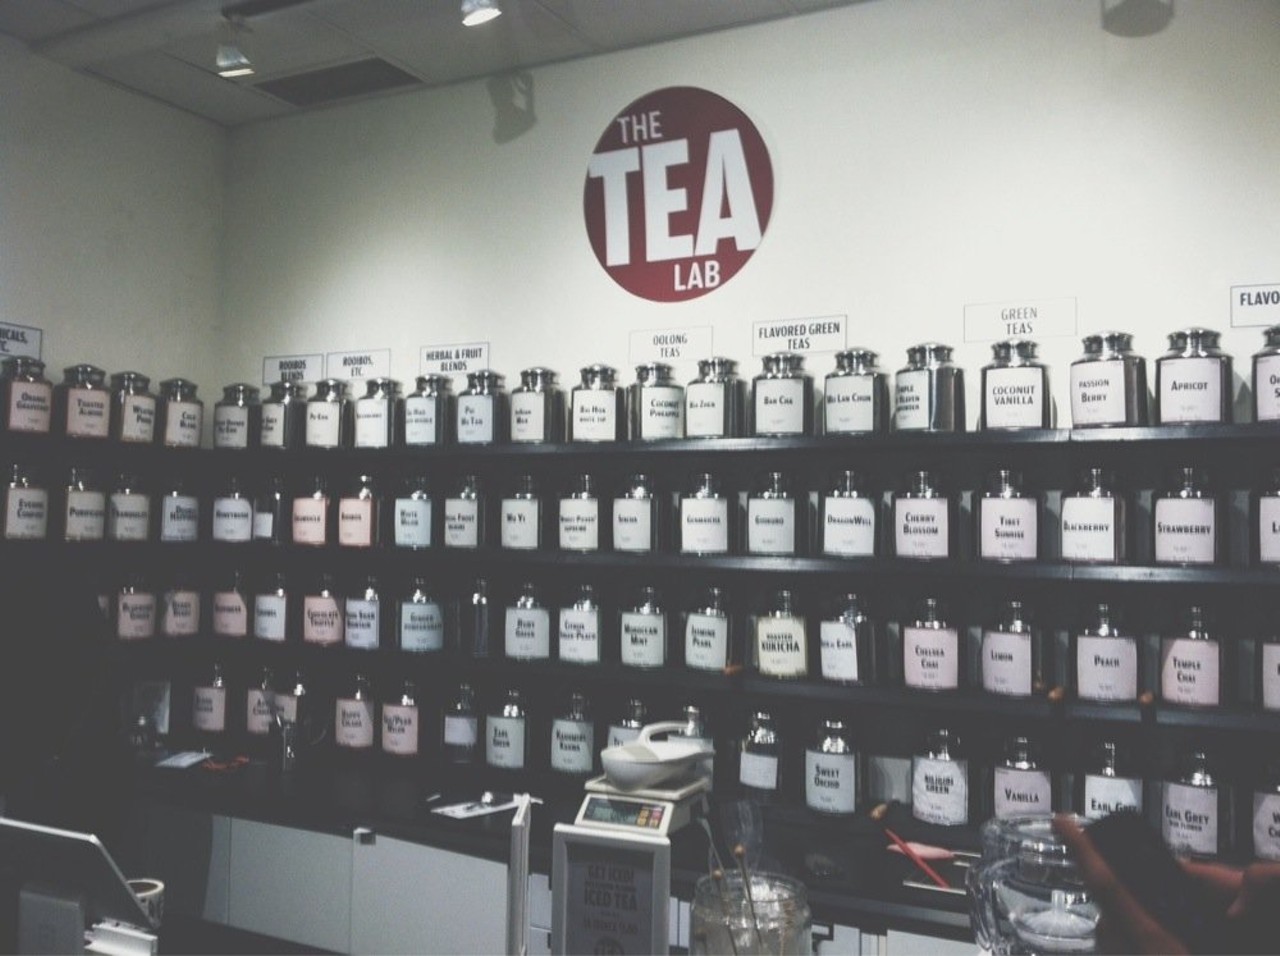 The Tea Lab | Fifth St Arcade
530 Euclid Ave
Ste 17
Cleveland, OH 44115